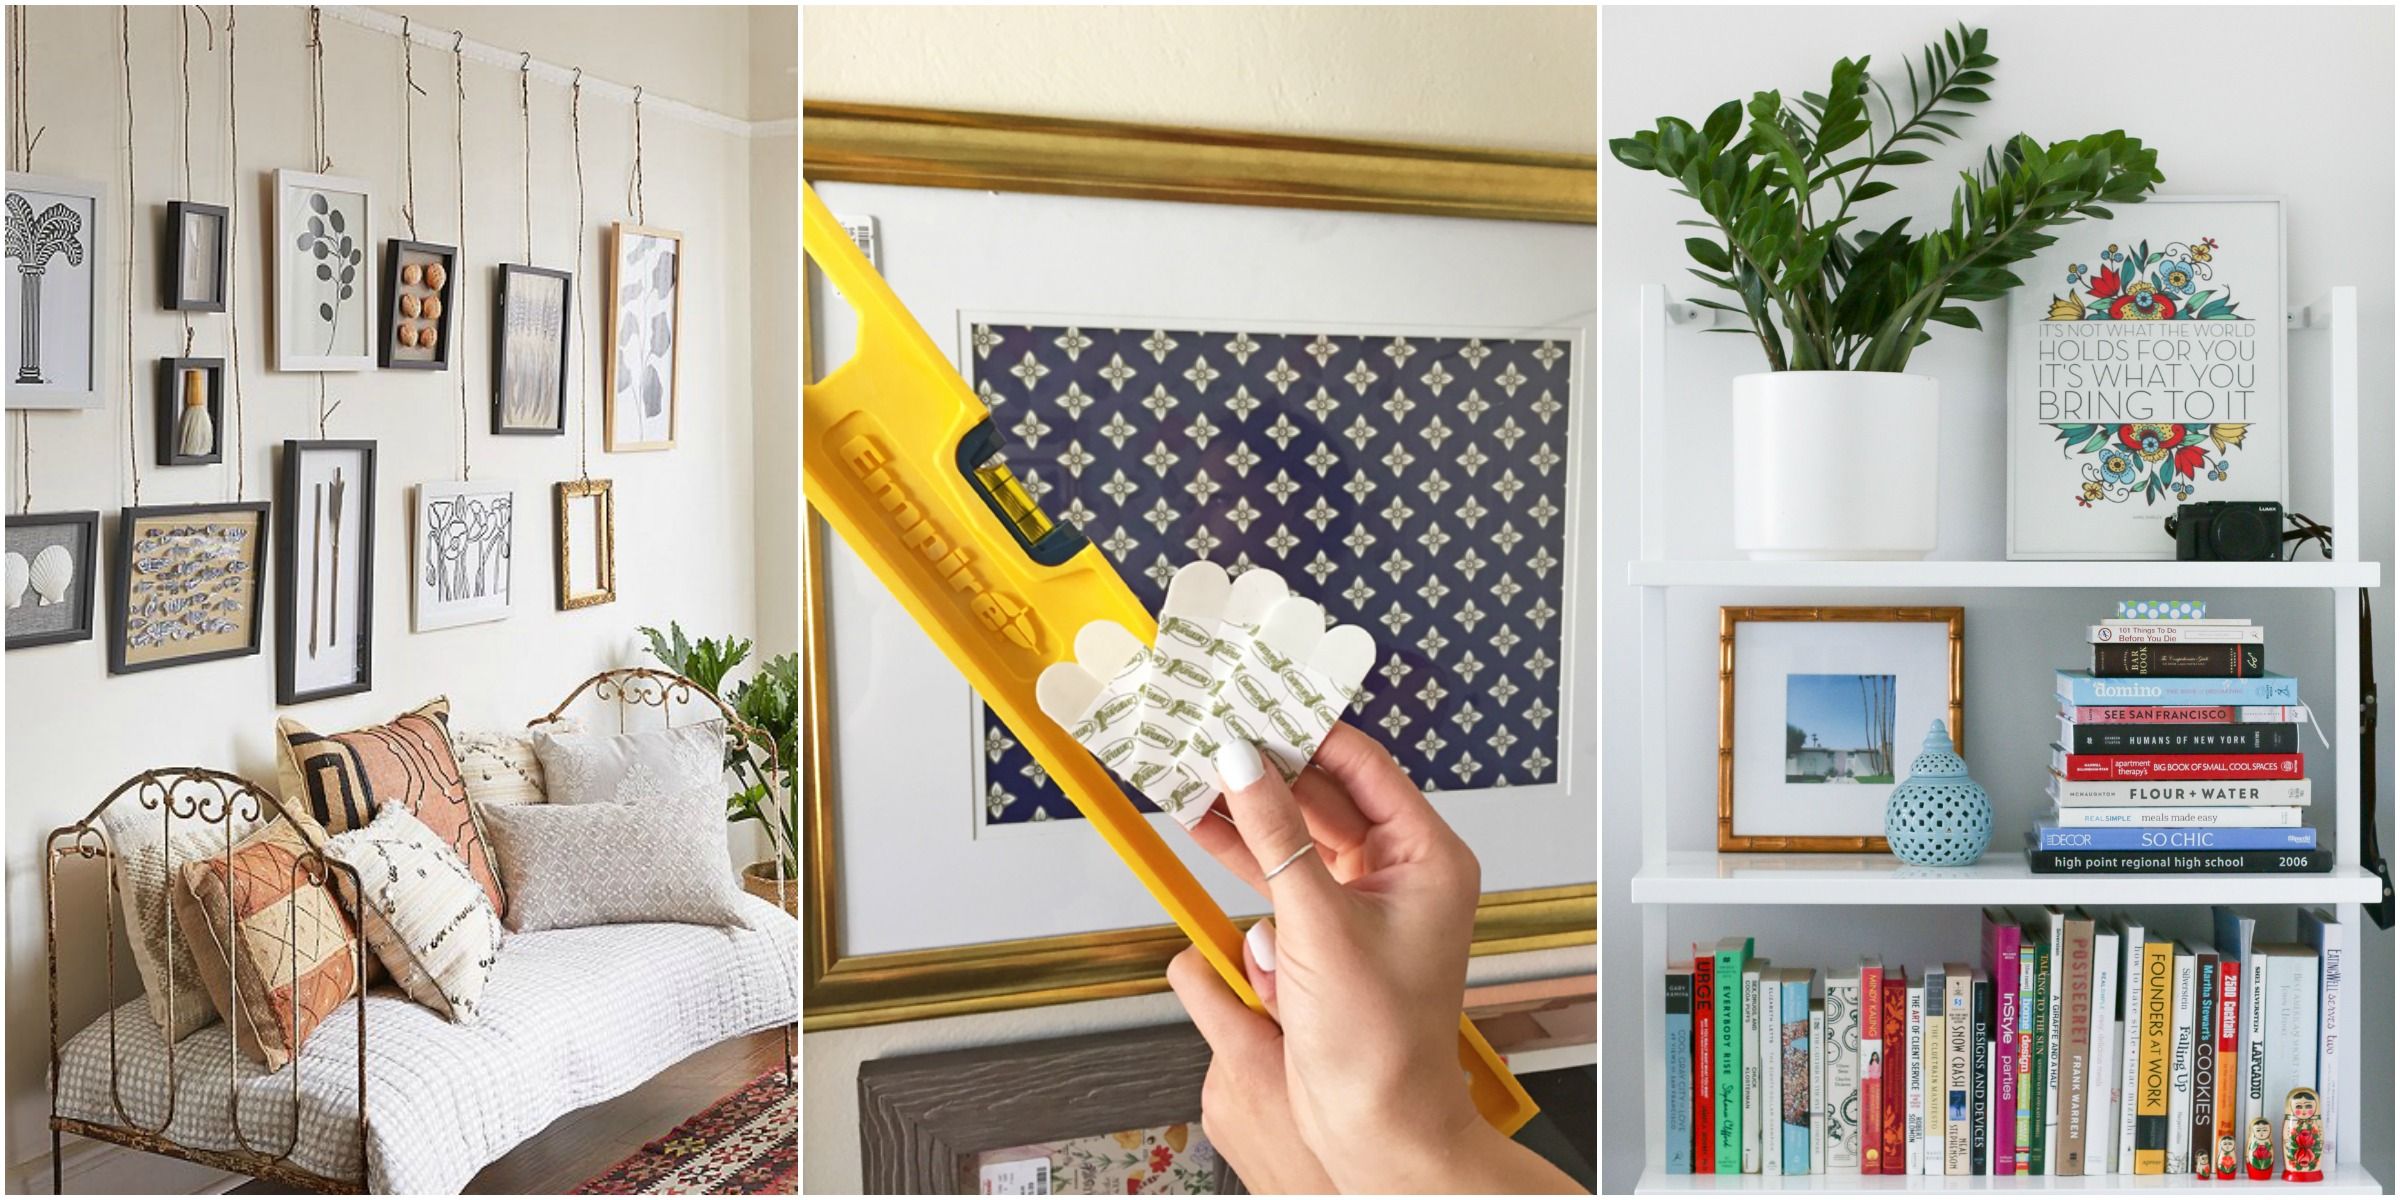 Hang Art Without Nails How To, How To Secure Bookcase Wall Without Drilling